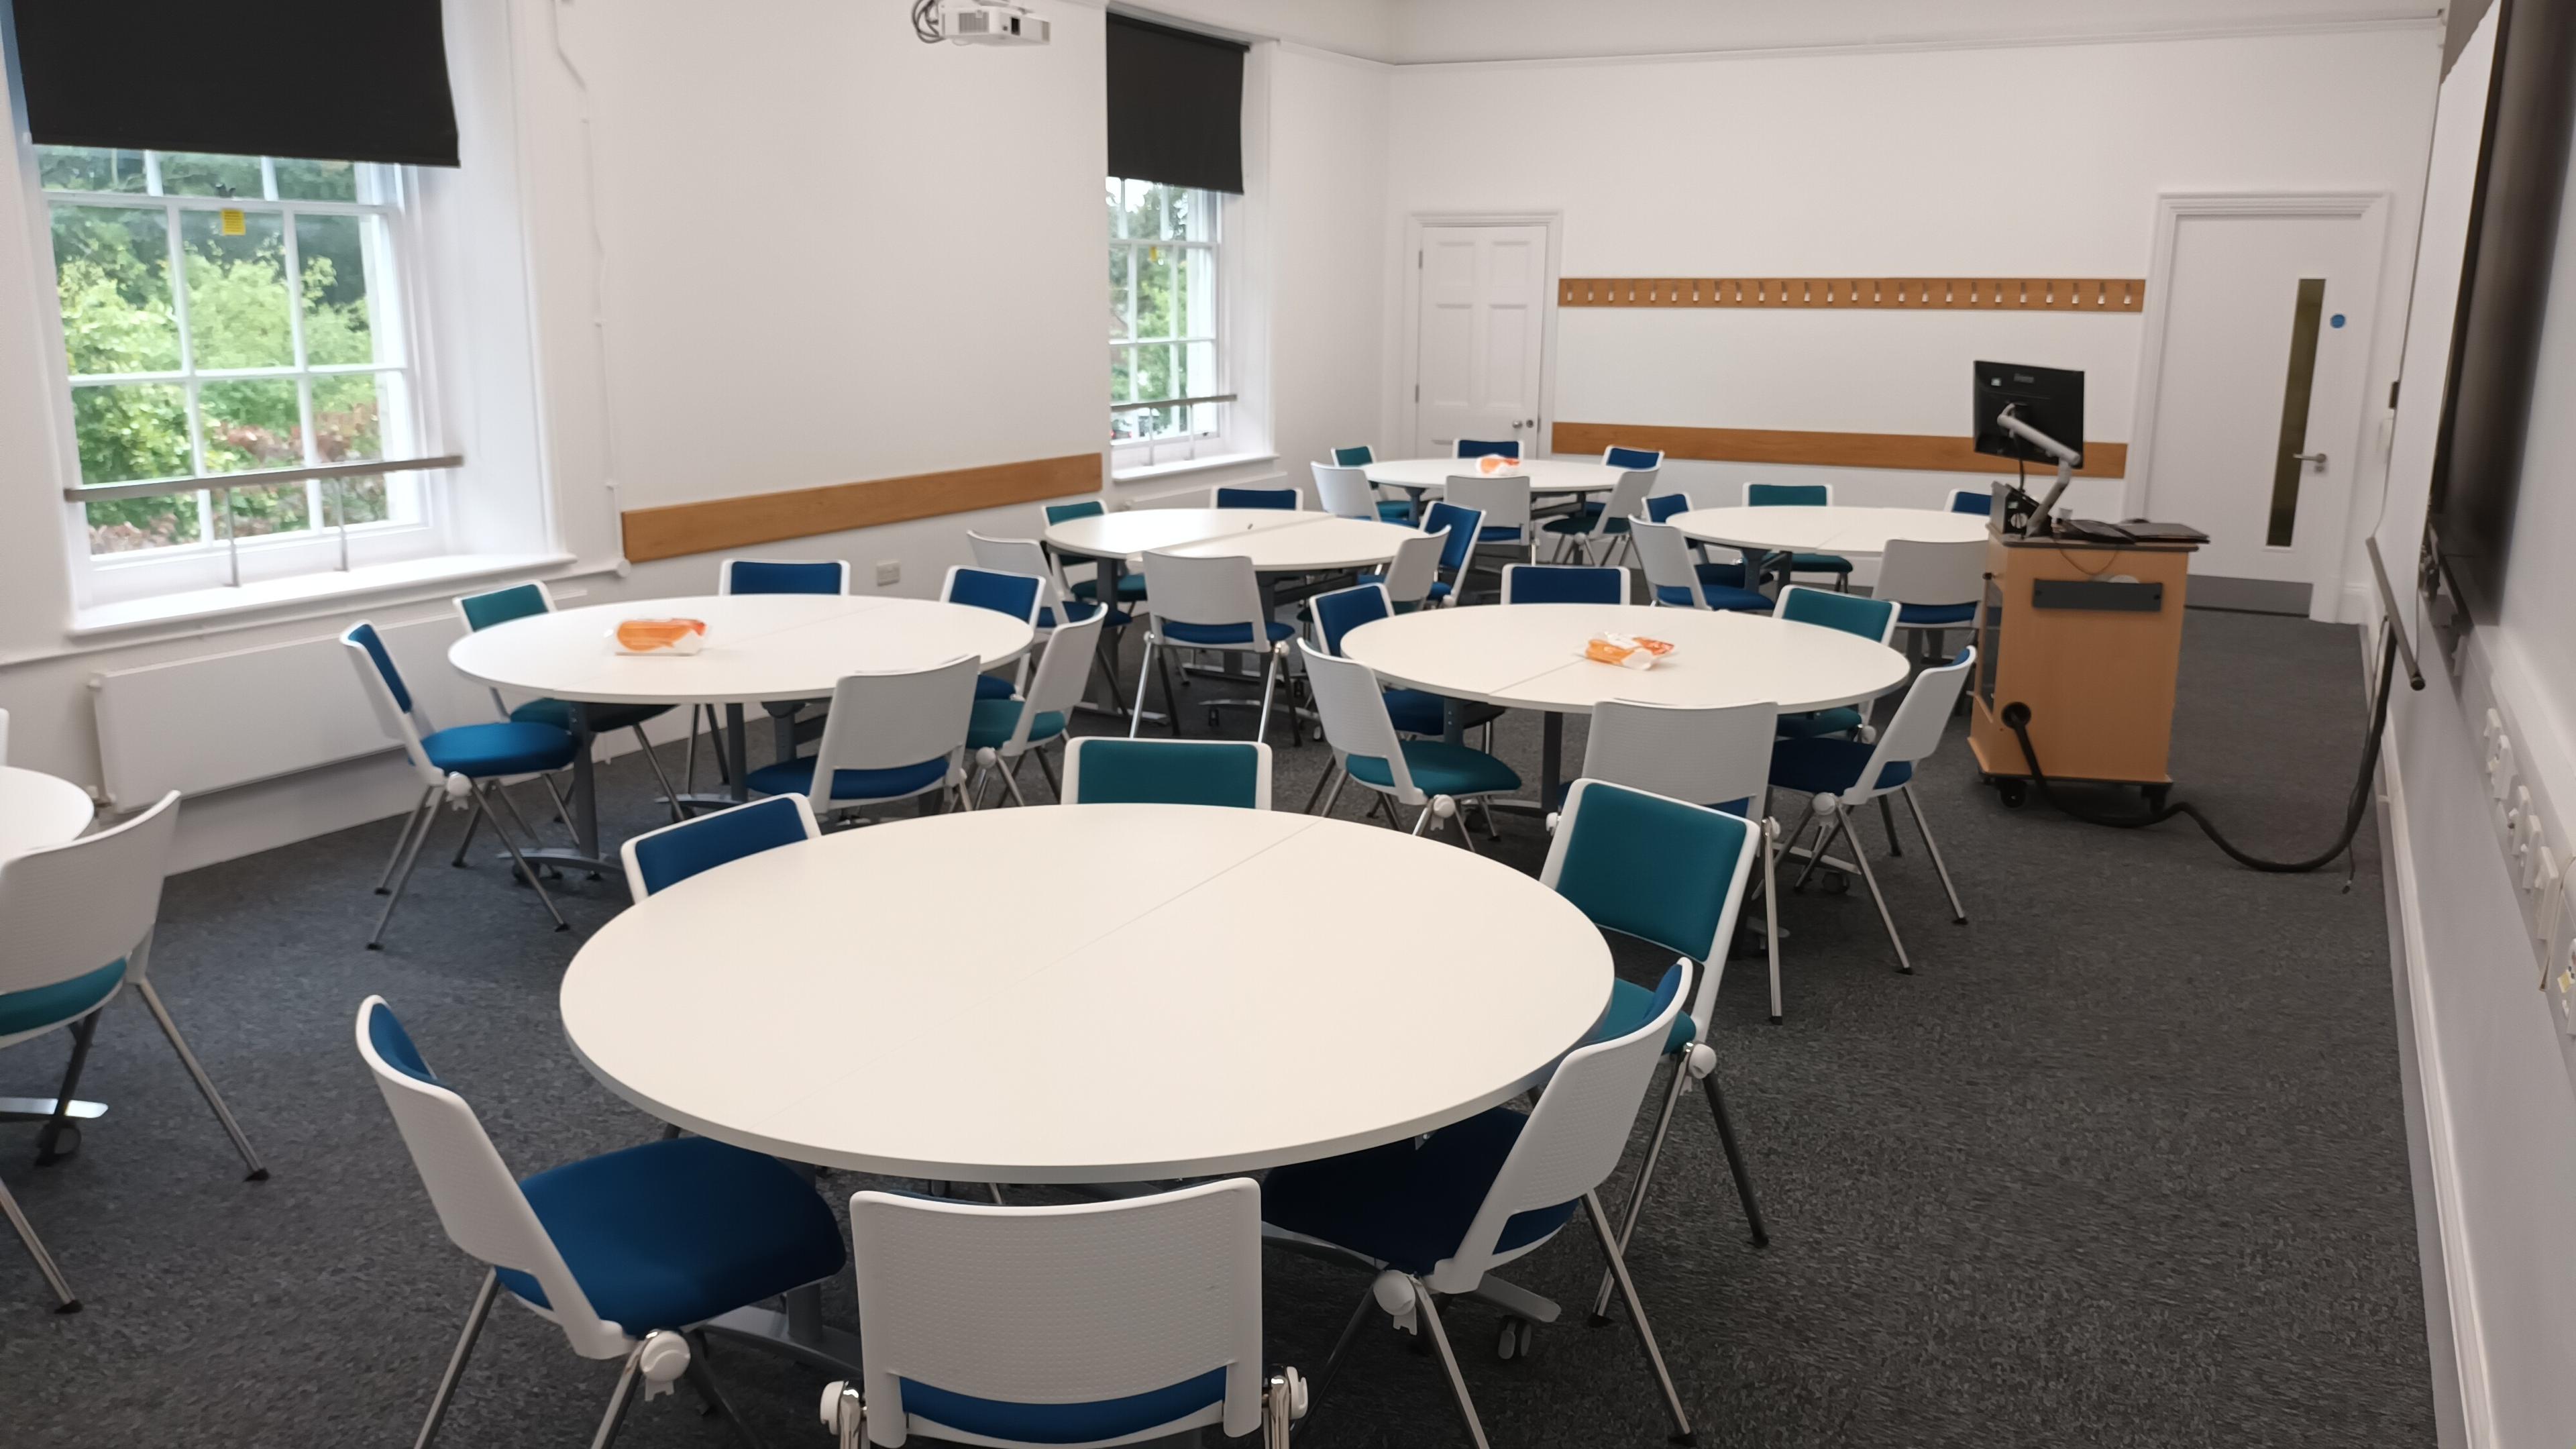 Canterbury Christ Church University, The Old Sessions House Classroom F17 photo #1